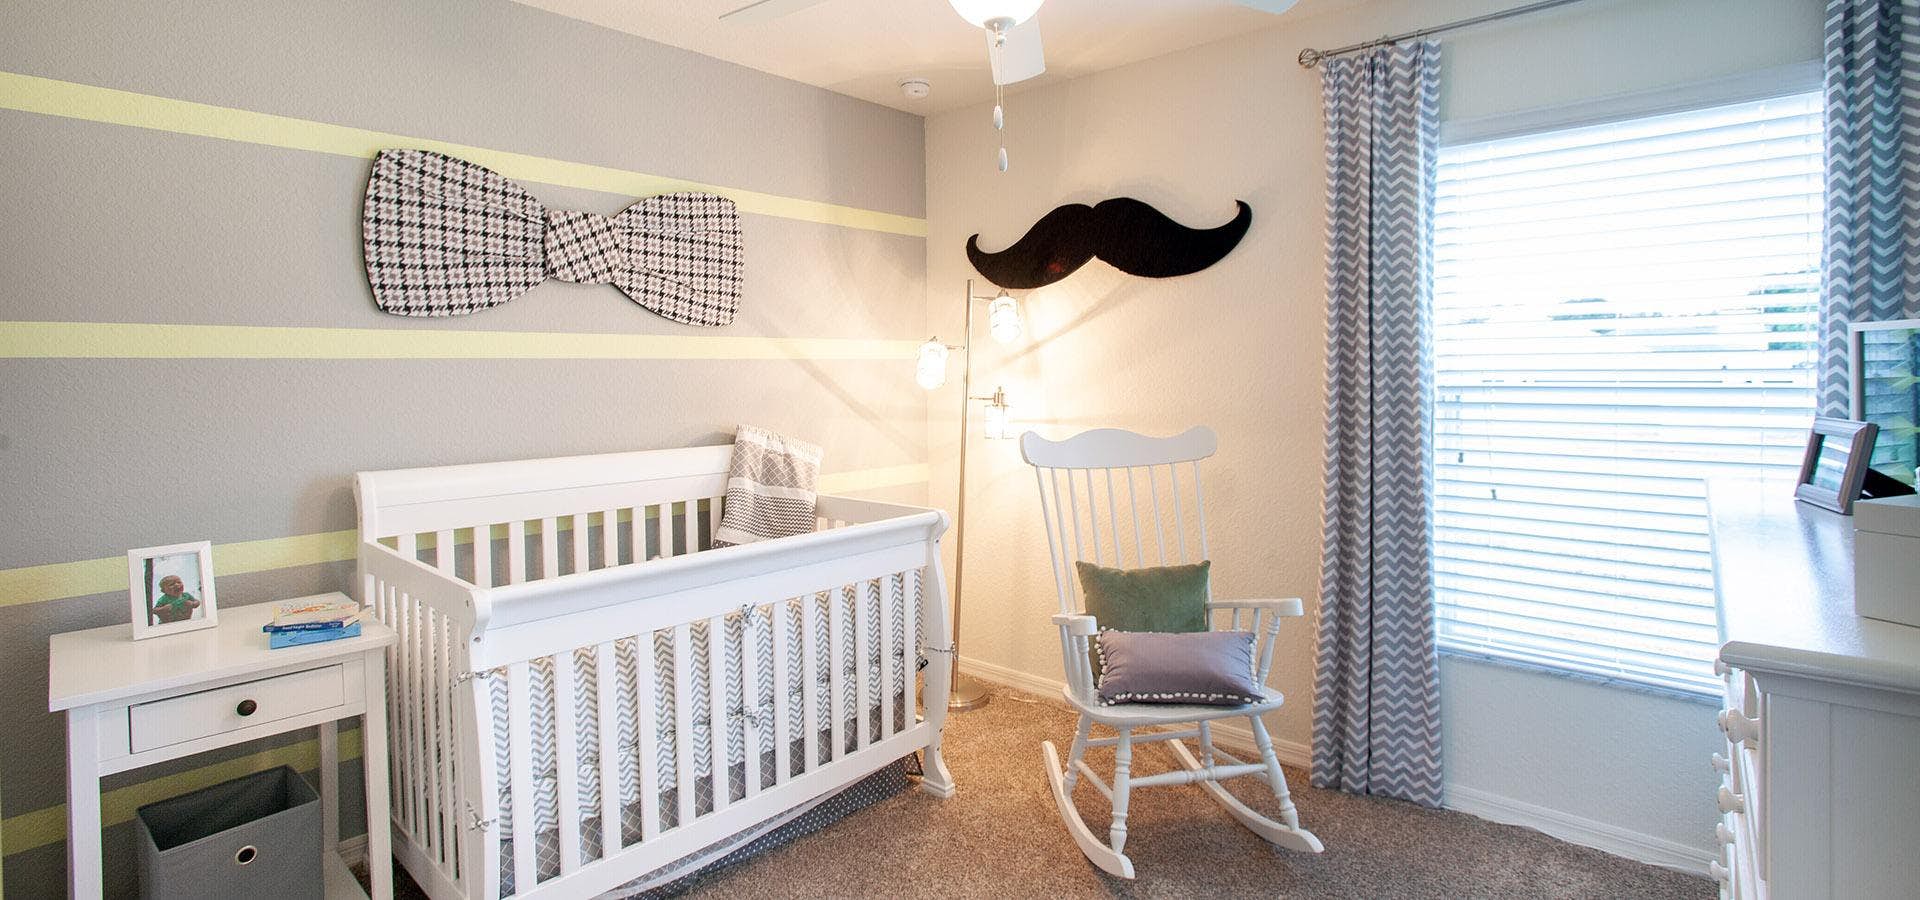 Children's room with crib and rocking chair